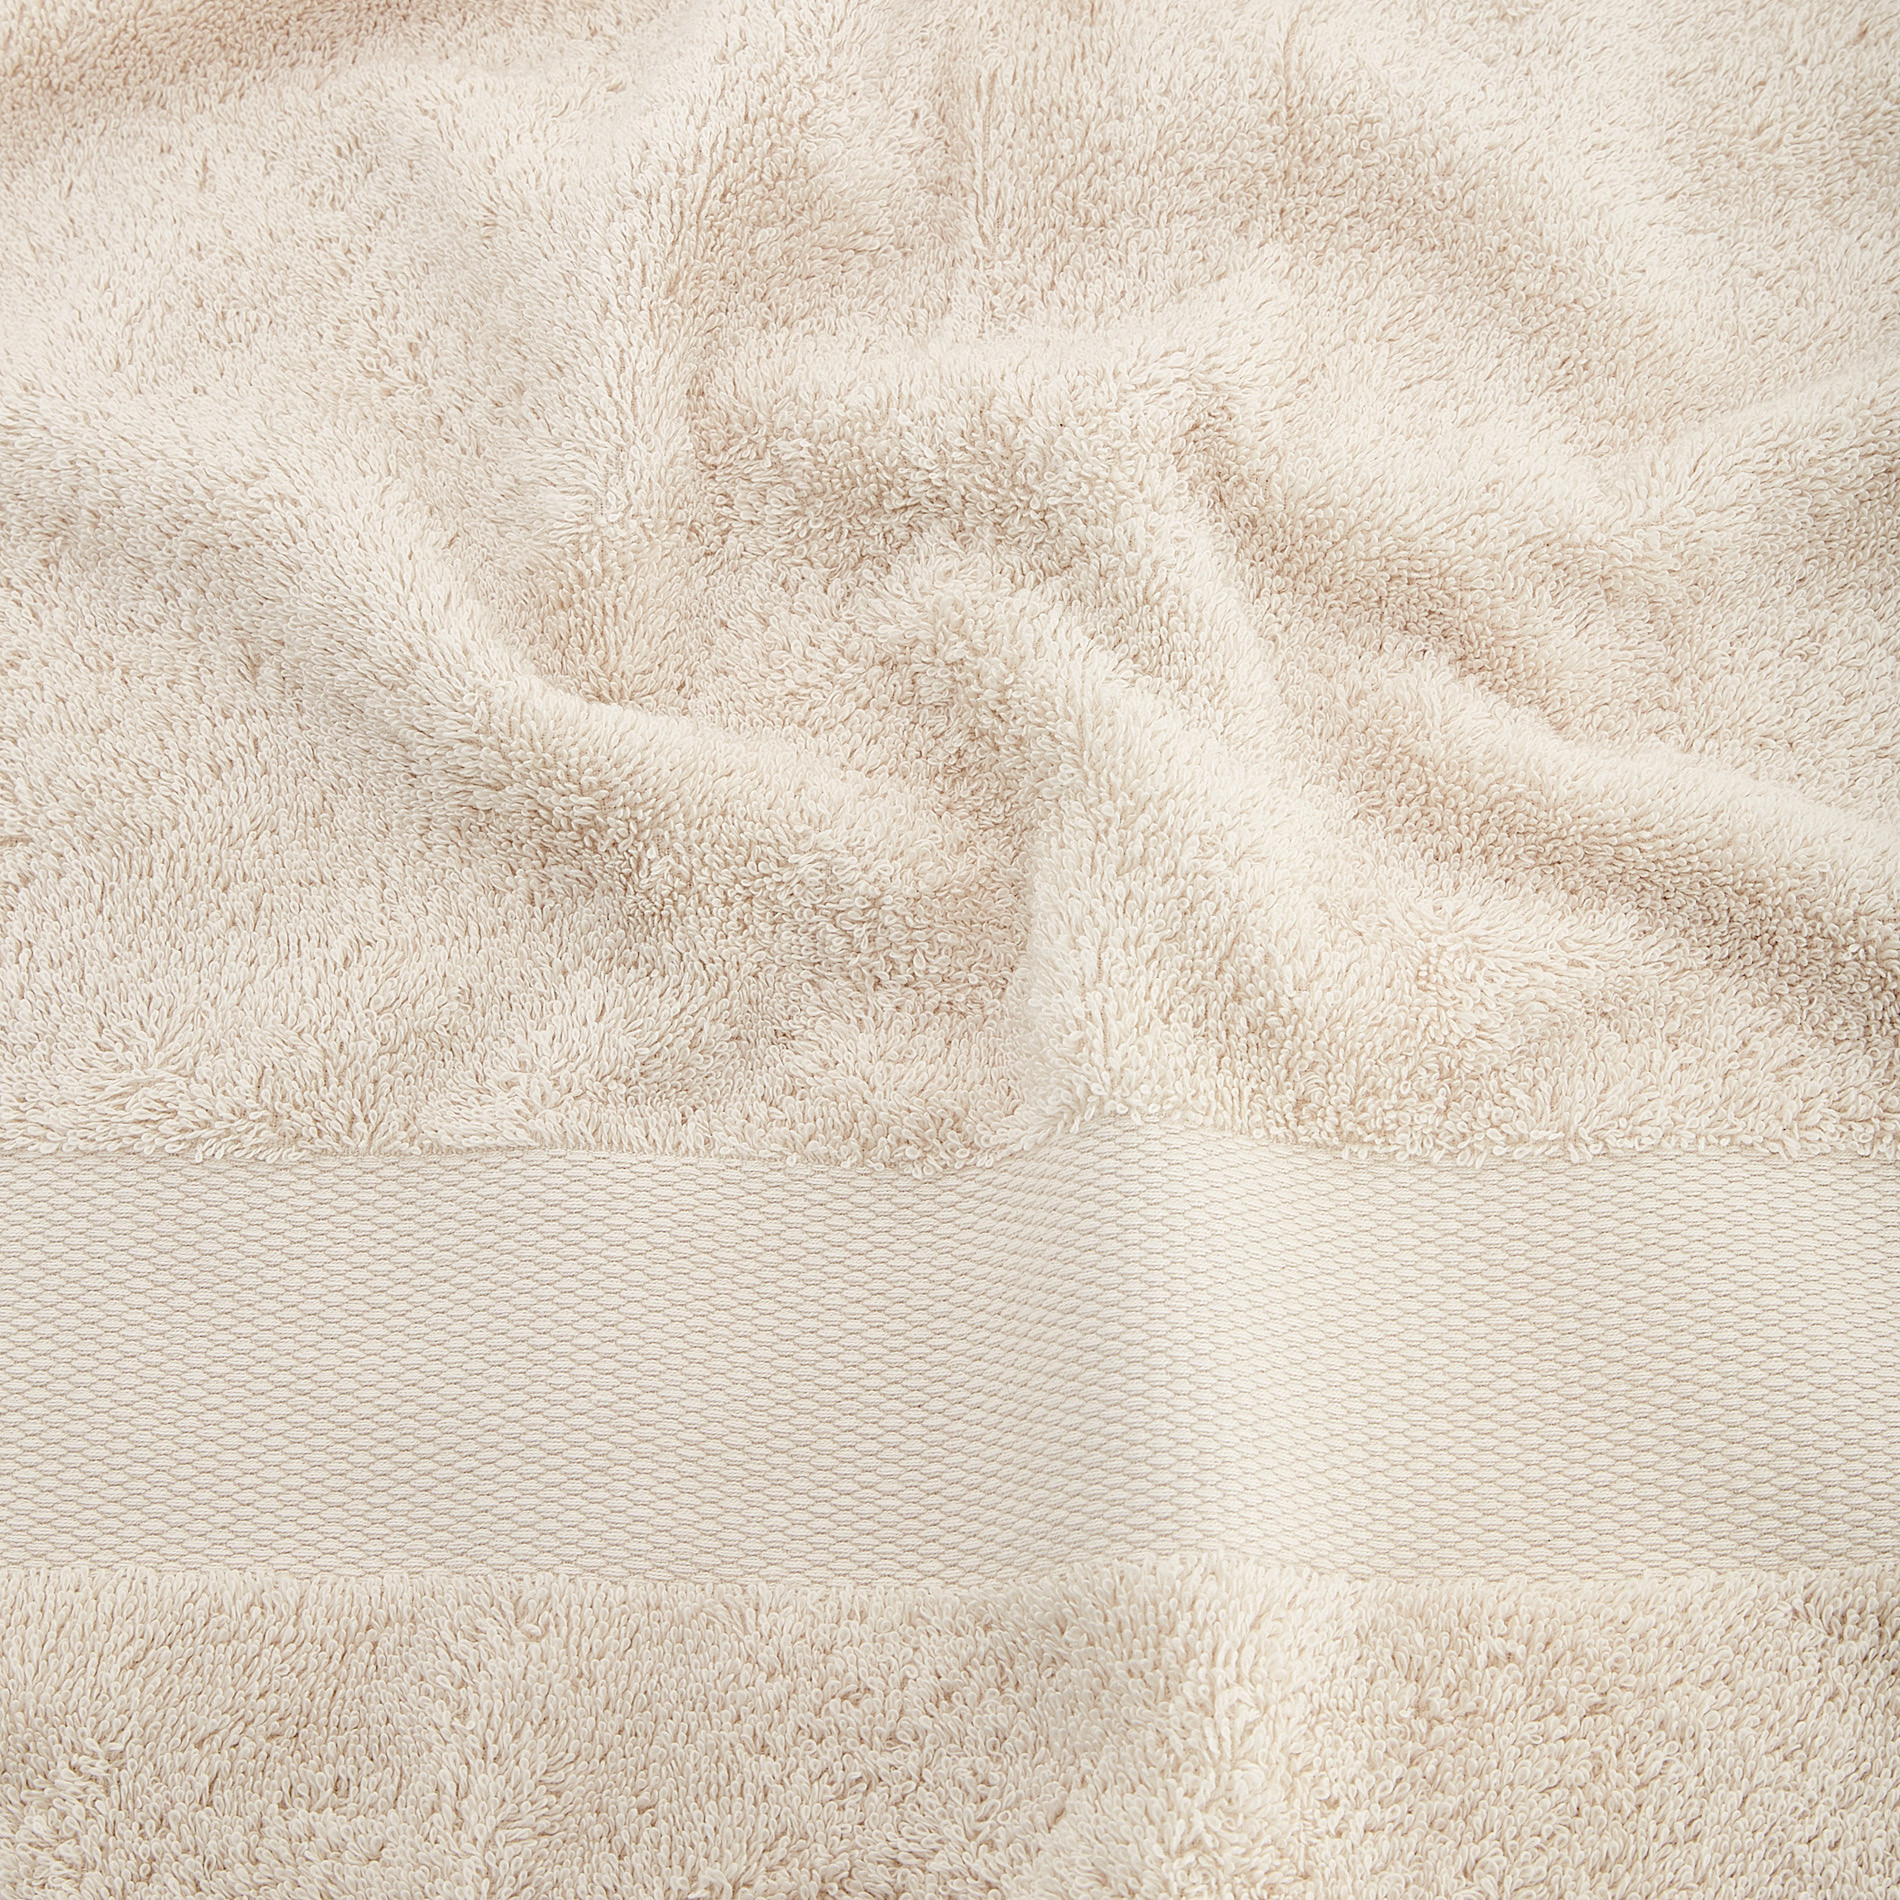 Zefiro pure cotton terry towel, Nougat Beige, large image number 3